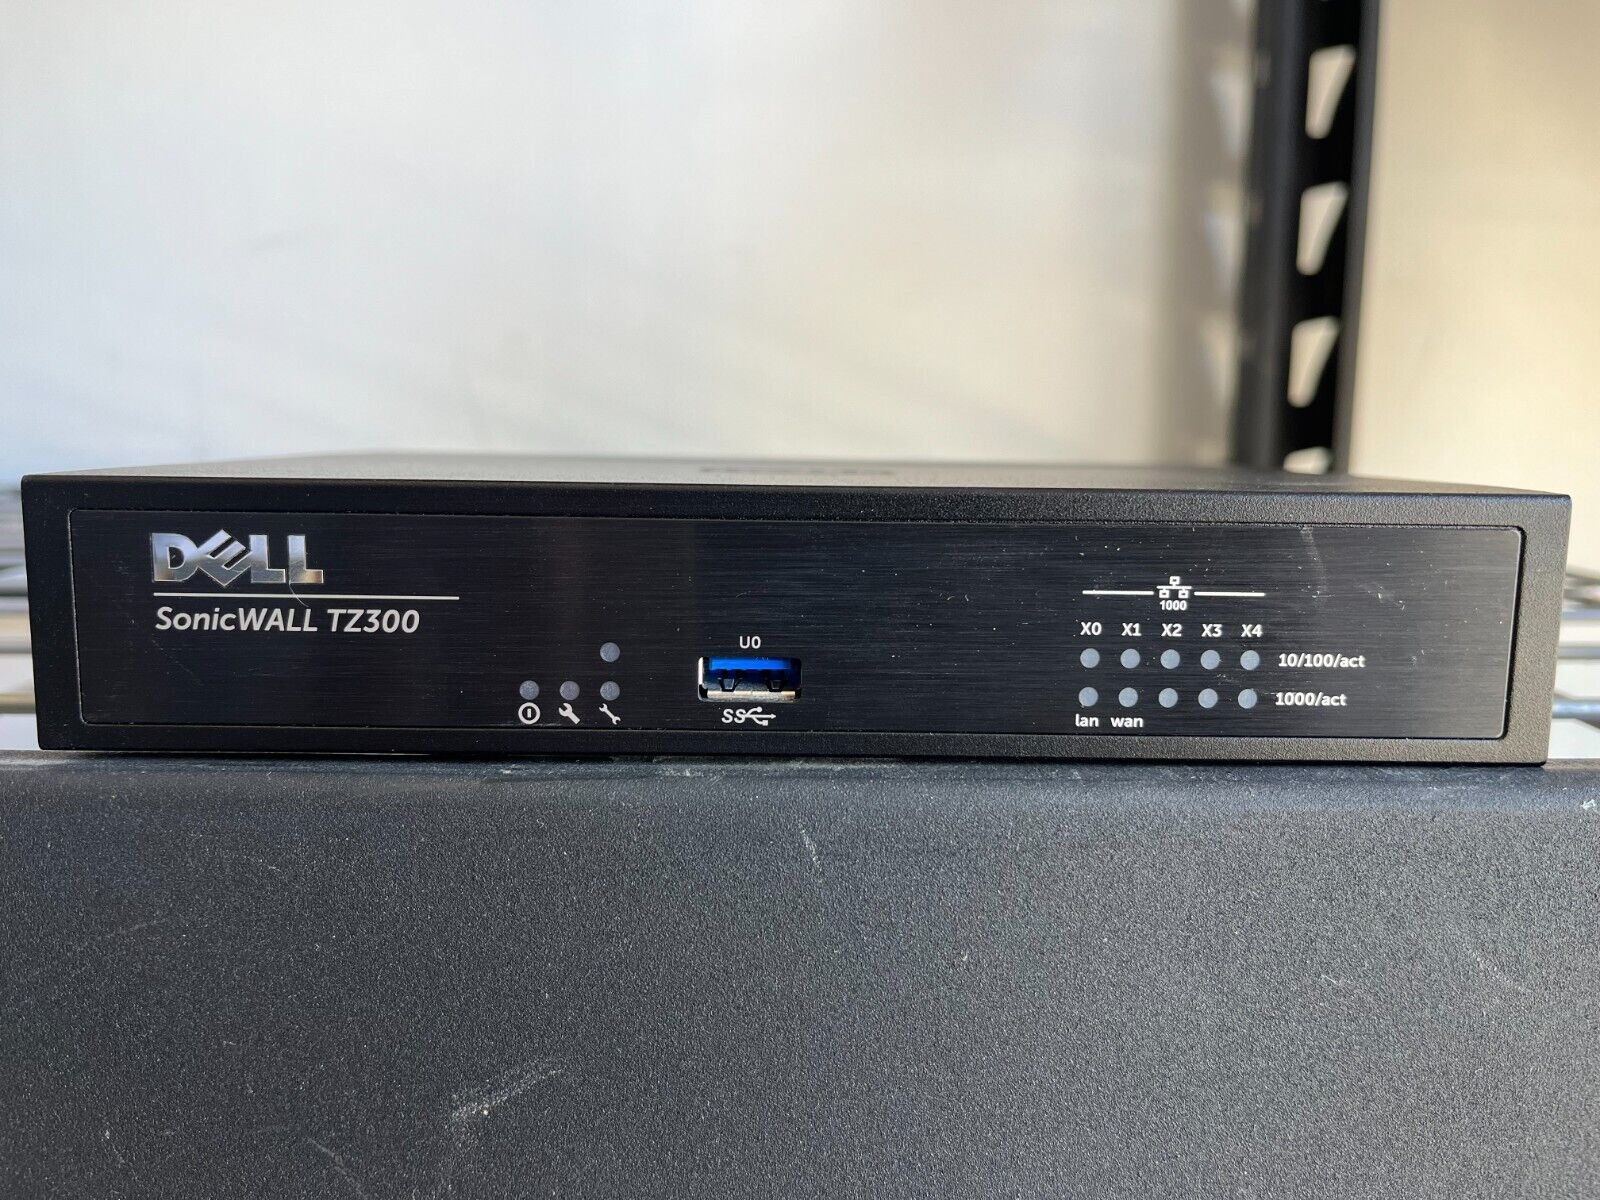 Dell SonicWall TZ300 Power Supply Firewall Router Network Security Appliance